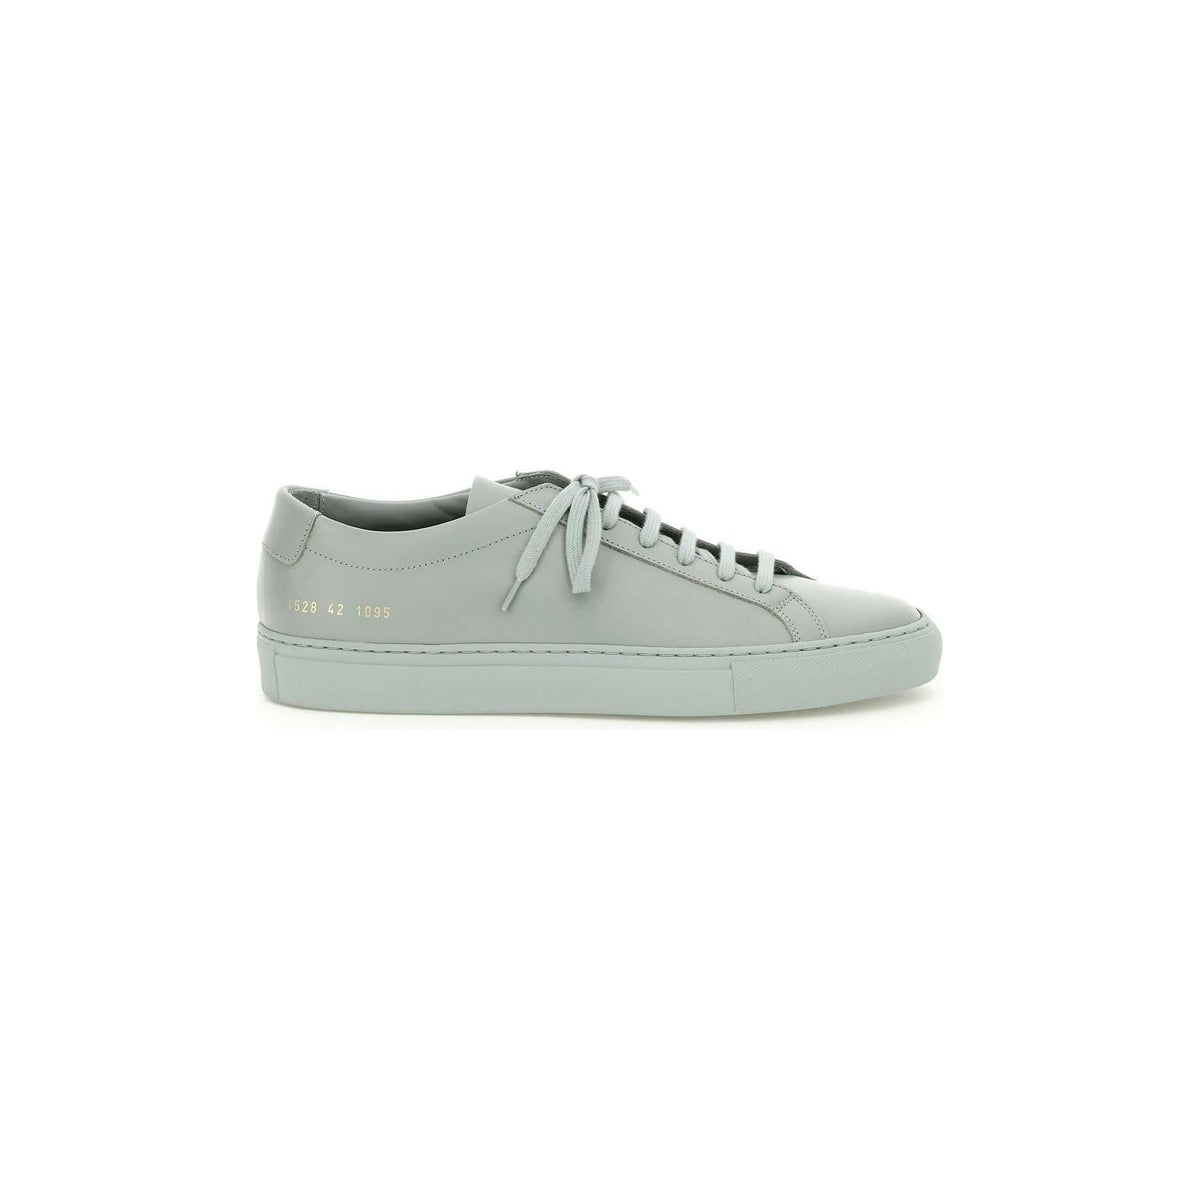 COMMON PROJECTS - Vintage Green Original Achilles Low-Top Leather Sneakers - JOHN JULIA